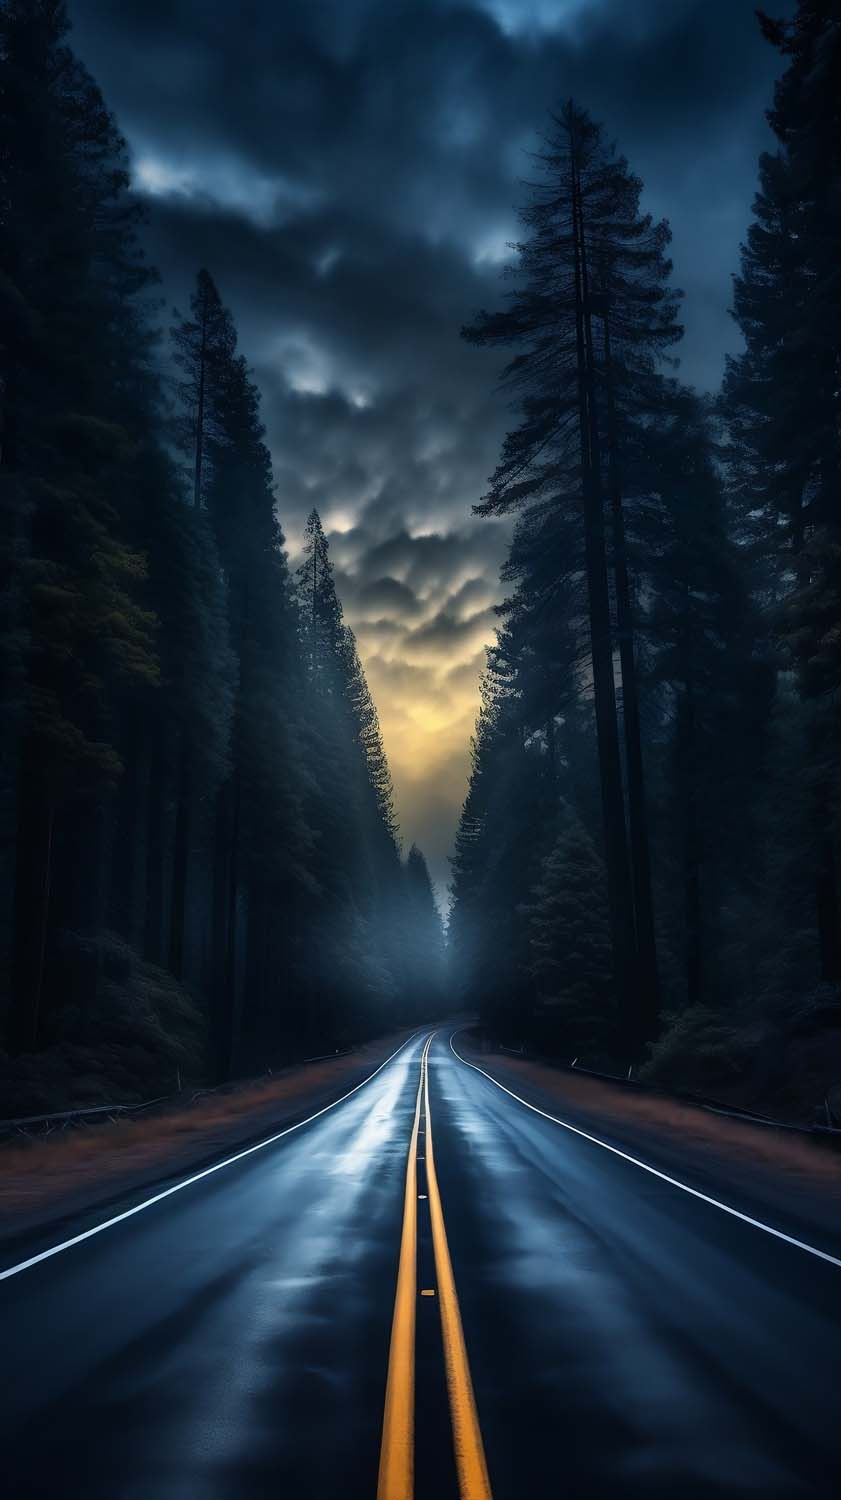 Cloudy Mist Road iPhone Wallpaper 4K  iPhone Wallpapers